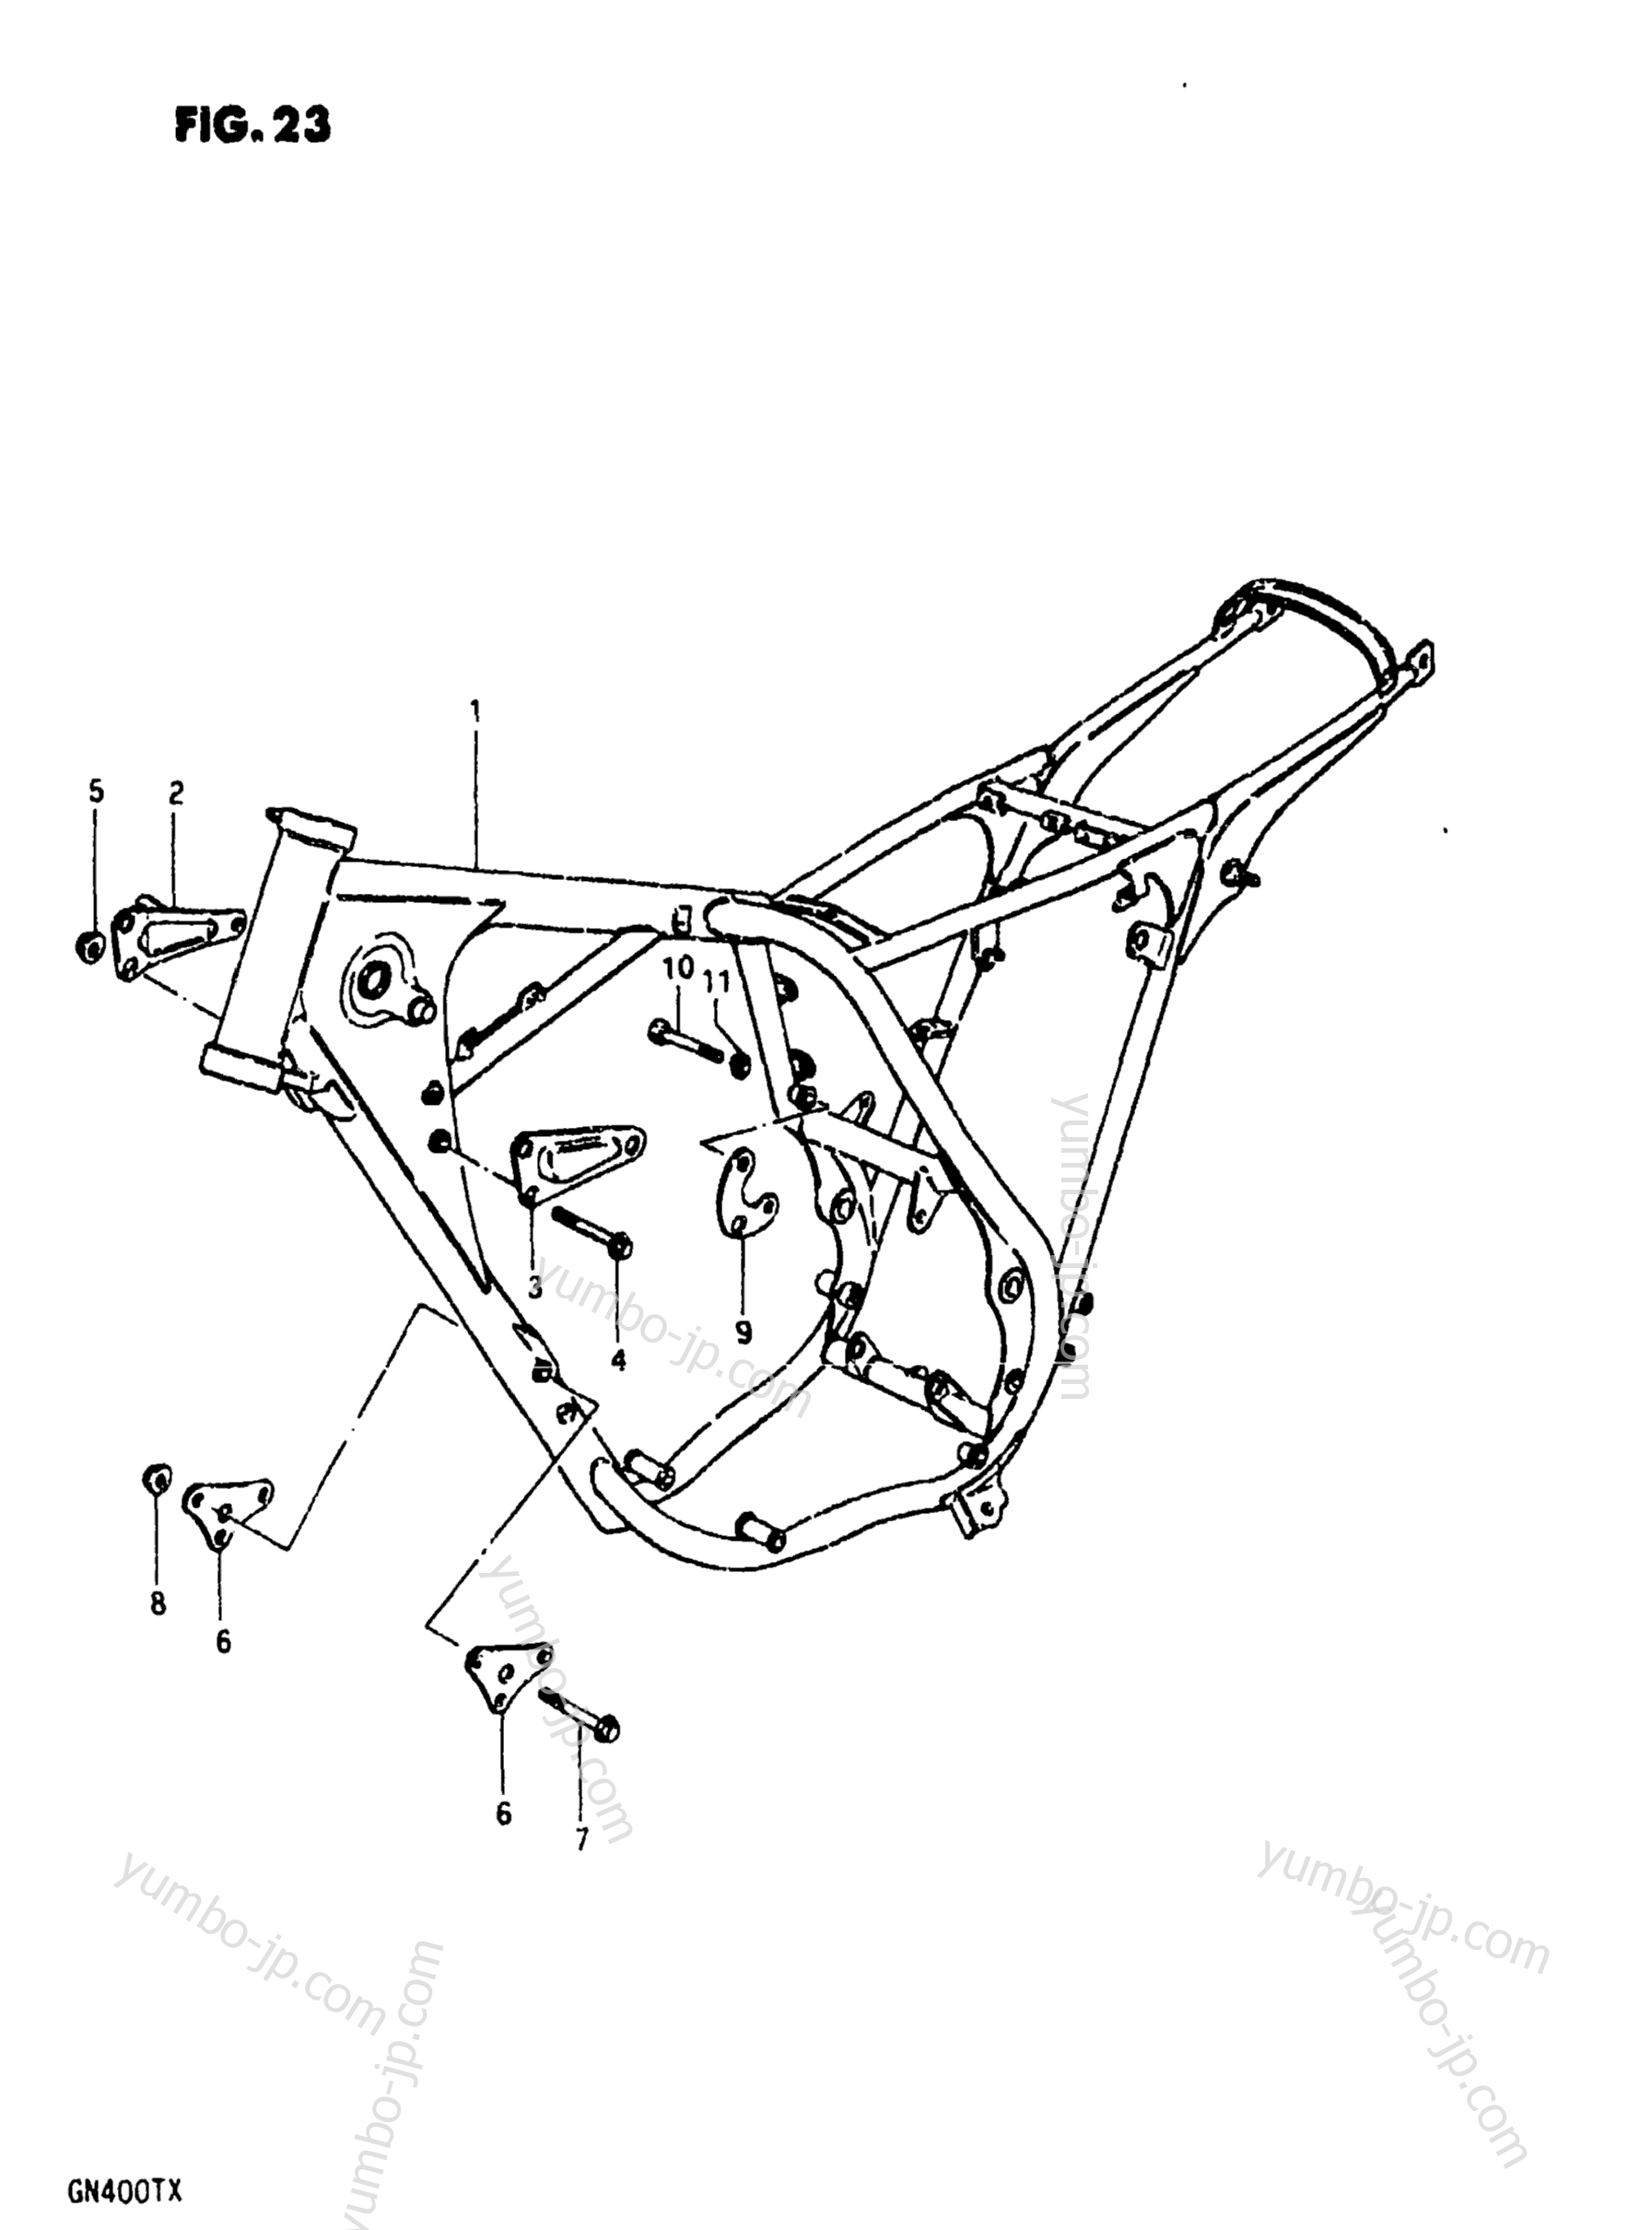 FRAME for motorcycles SUZUKI GN400XT 1981 year